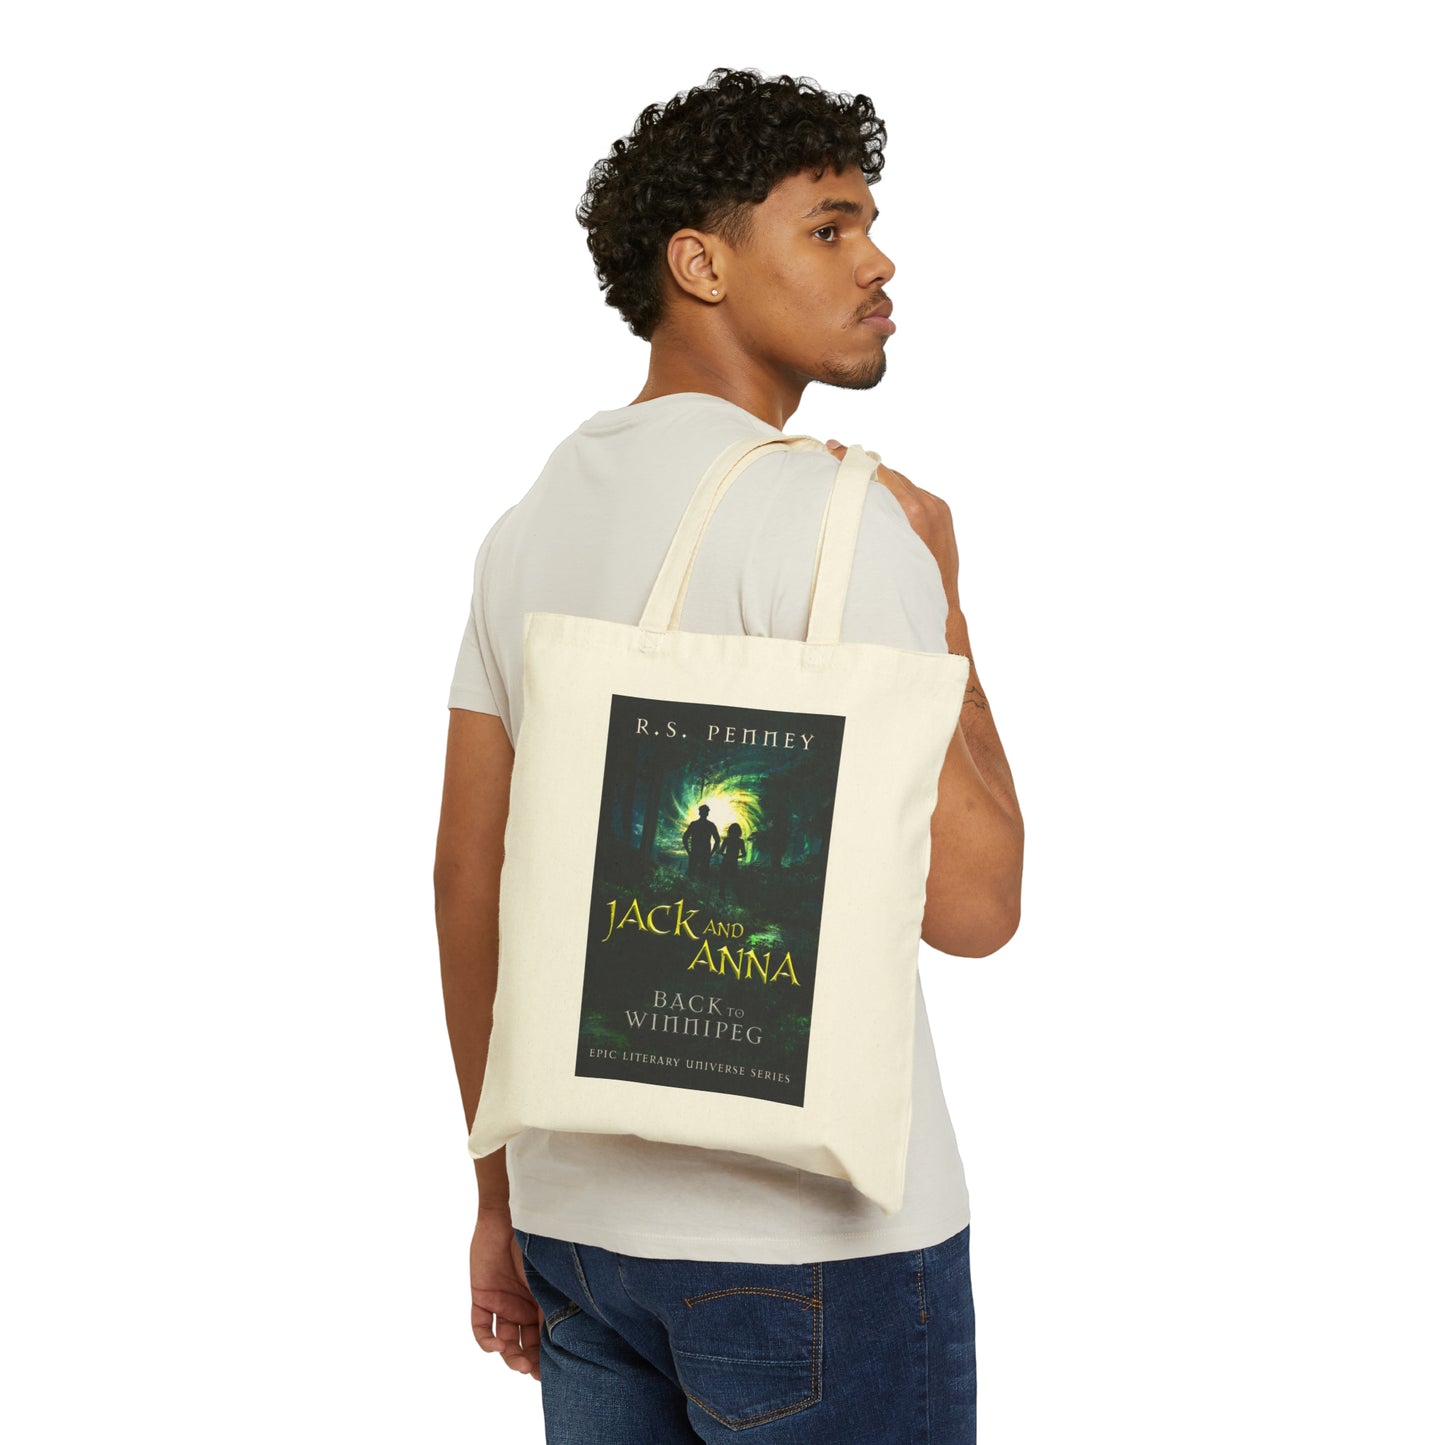 Jack And Anna - Back To Winnipeg - Cotton Canvas Tote Bag